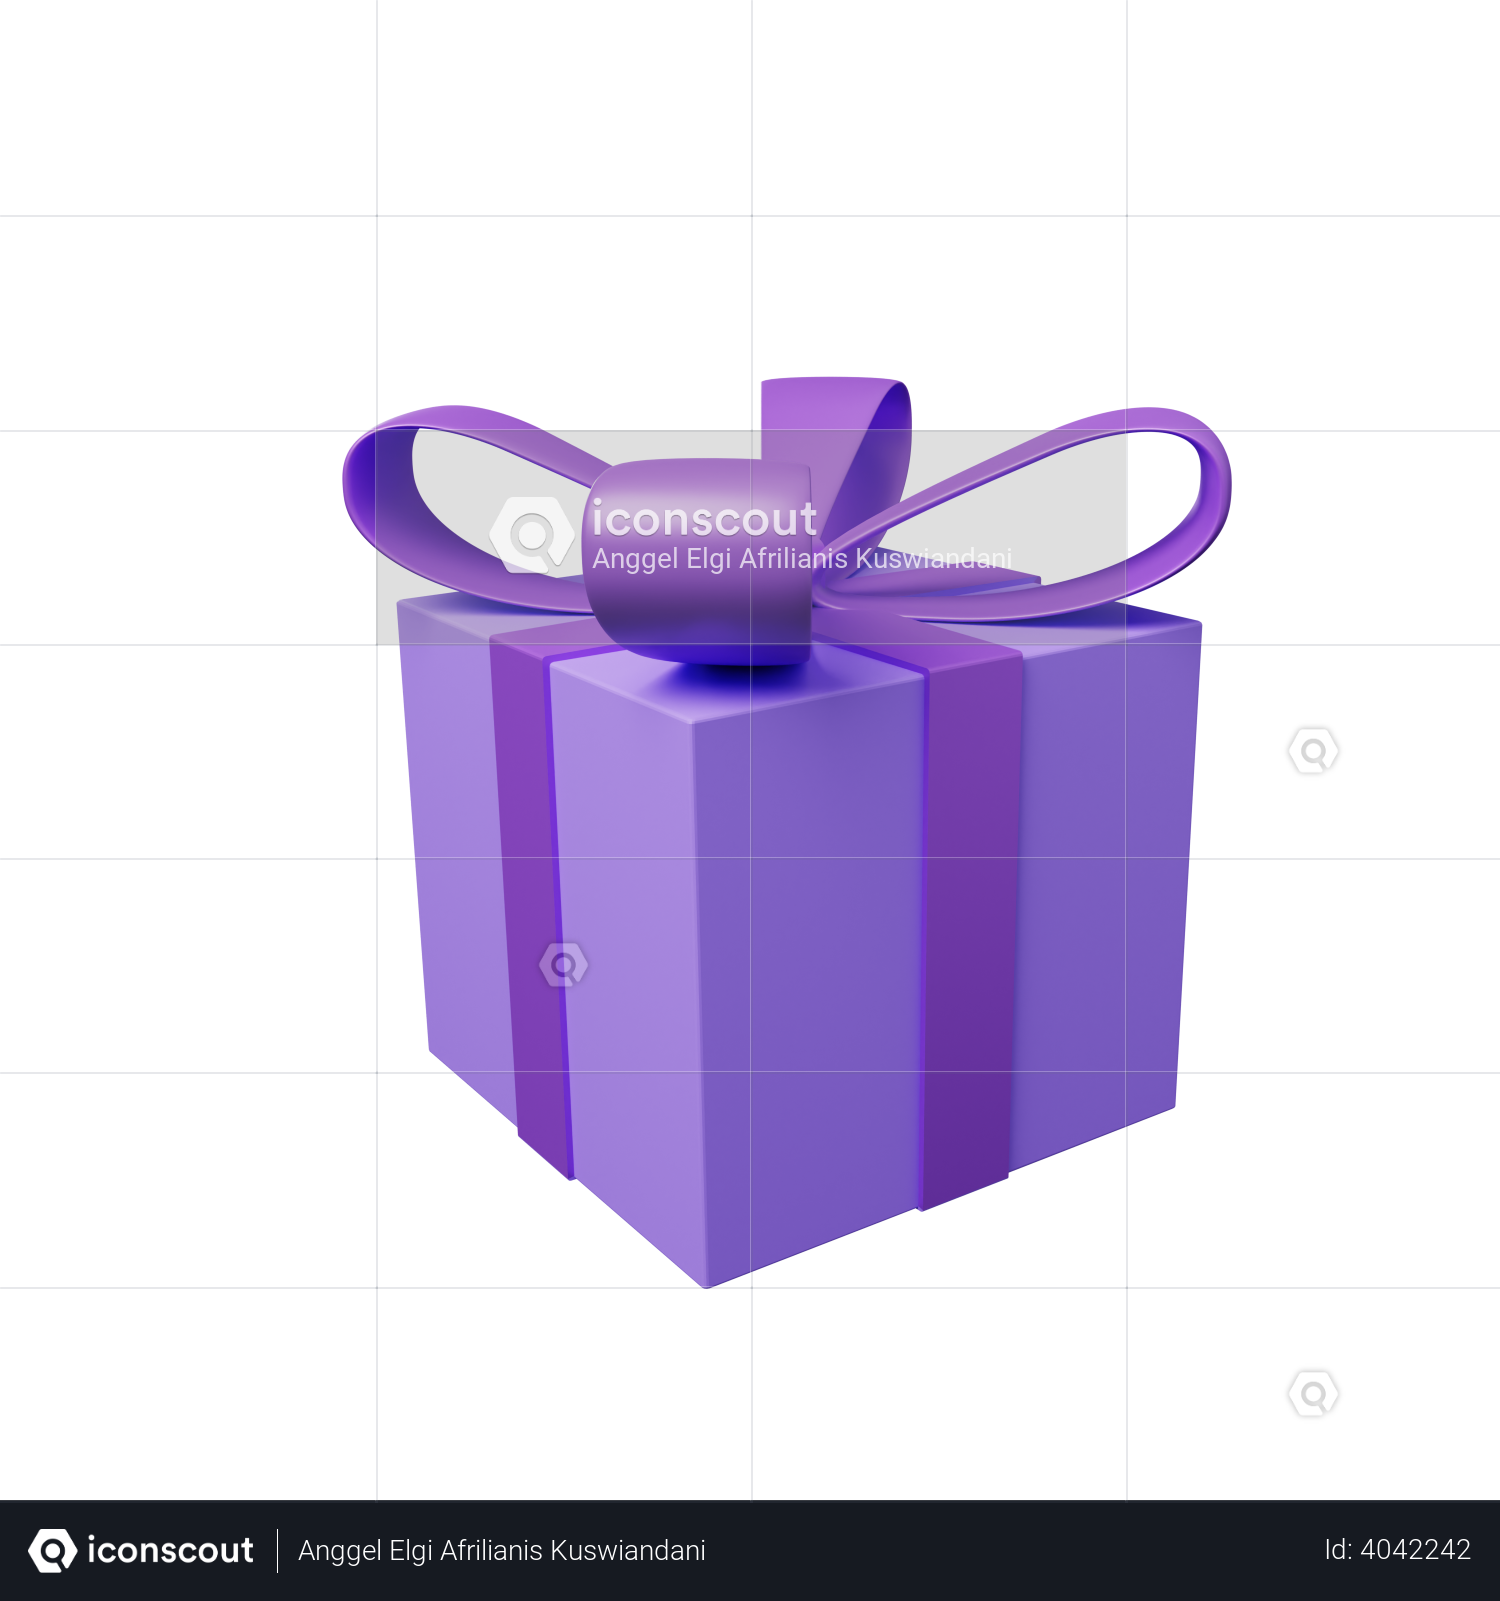 Gift Box Design Vector Hd Images, Gift Box Vector Illustration With Cute  And Colorful Design, Gift, Box, Present PNG Image For Free Download